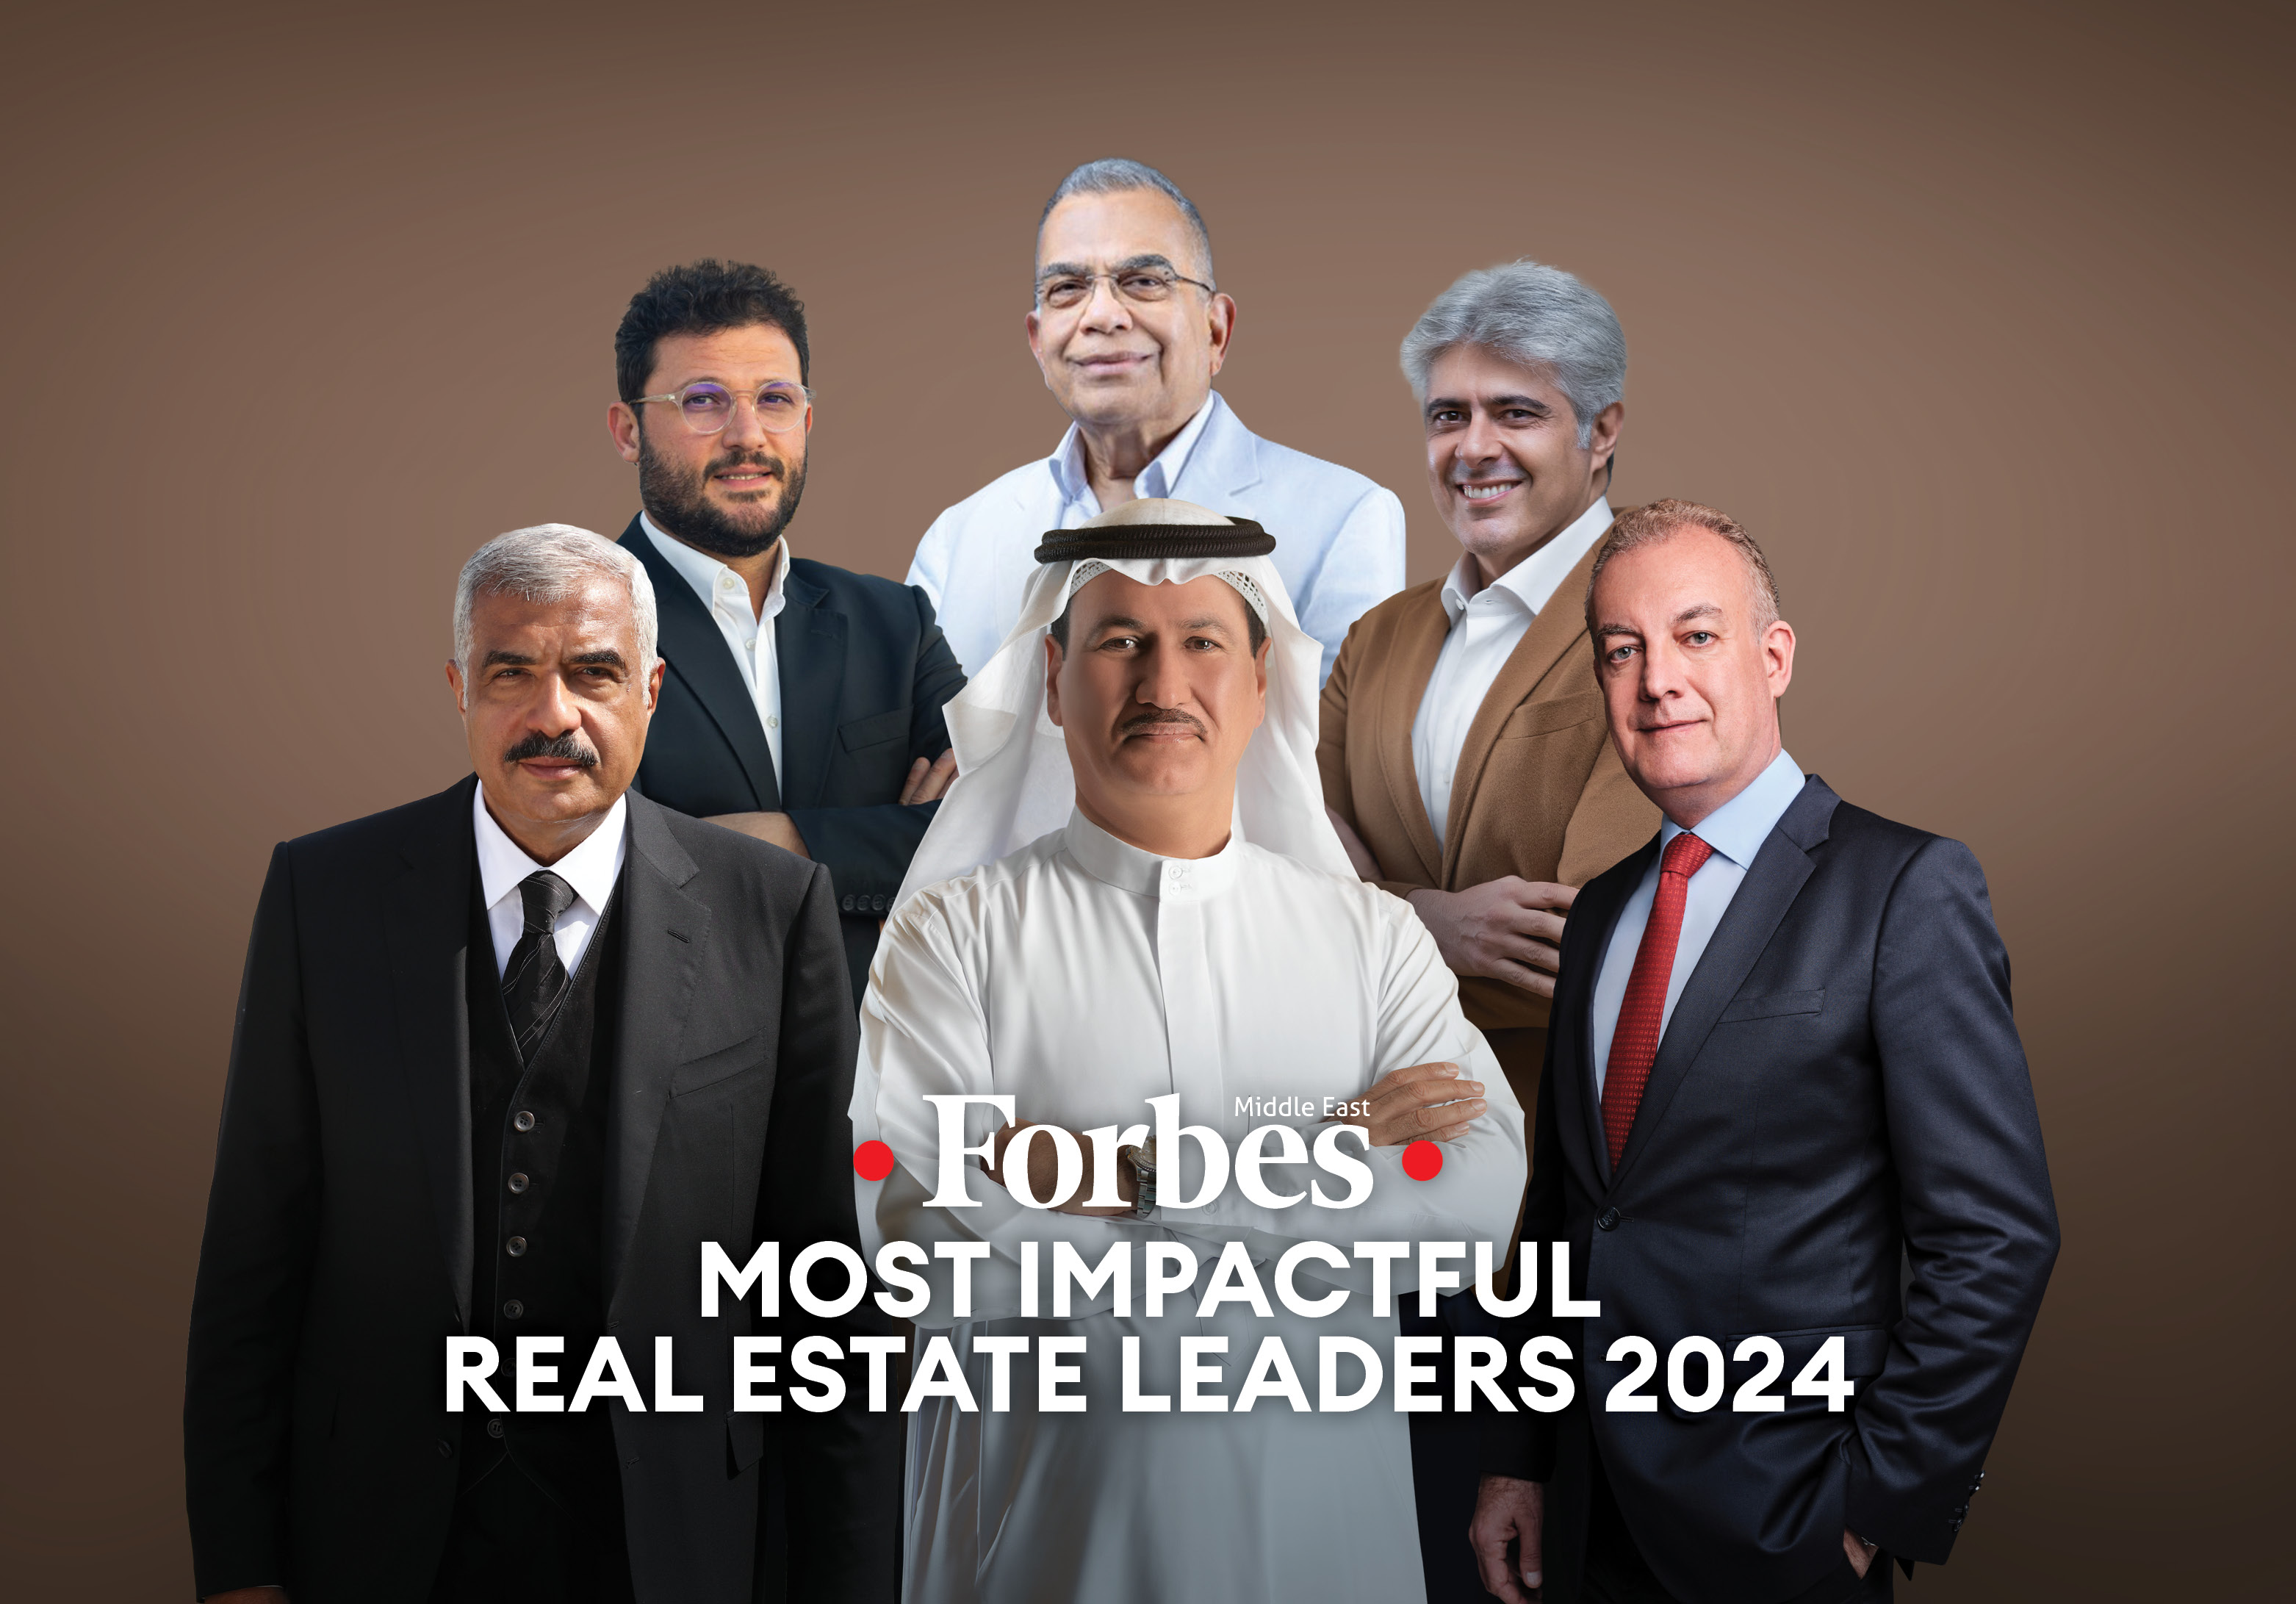 Most Impactful Real Estate Leaders 2024